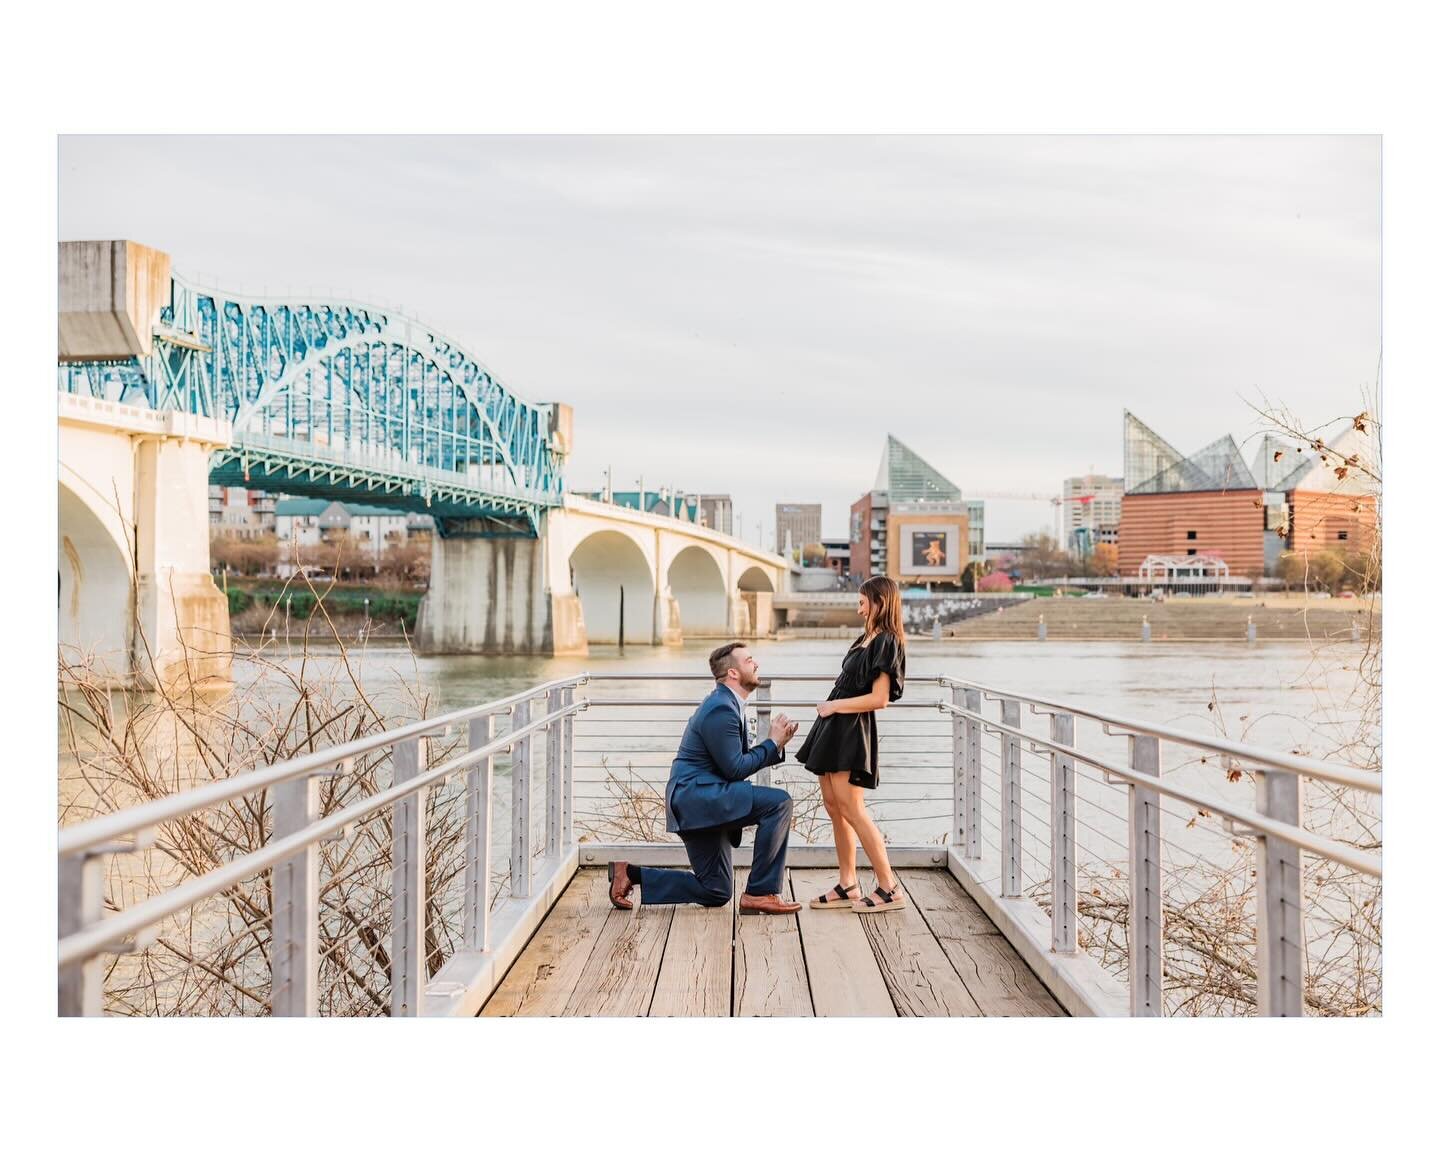 Ethan + Lexi got engaged last weekend and it was one of those gorgeous, good weather days that lets you know spring is almost here. Ethan chose the perfect spot for the engagement with the classic Market St. Bridge and aquarium in the background. Eve